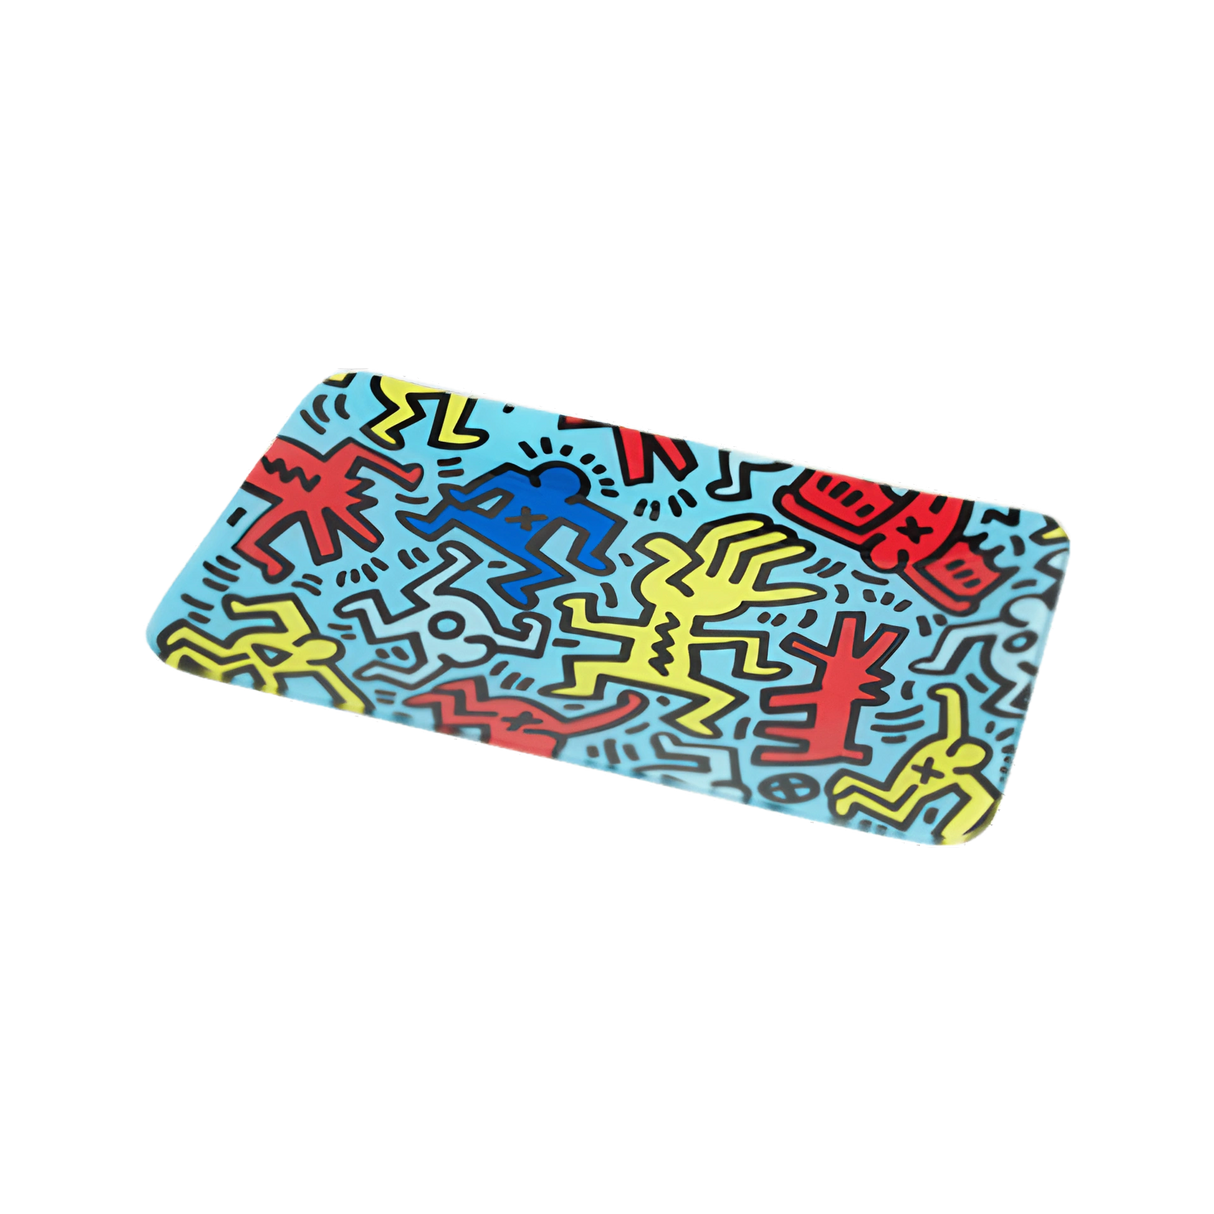 K.Haring Glass Collection rolling tray with vibrant artwork, angled view on a seamless white background